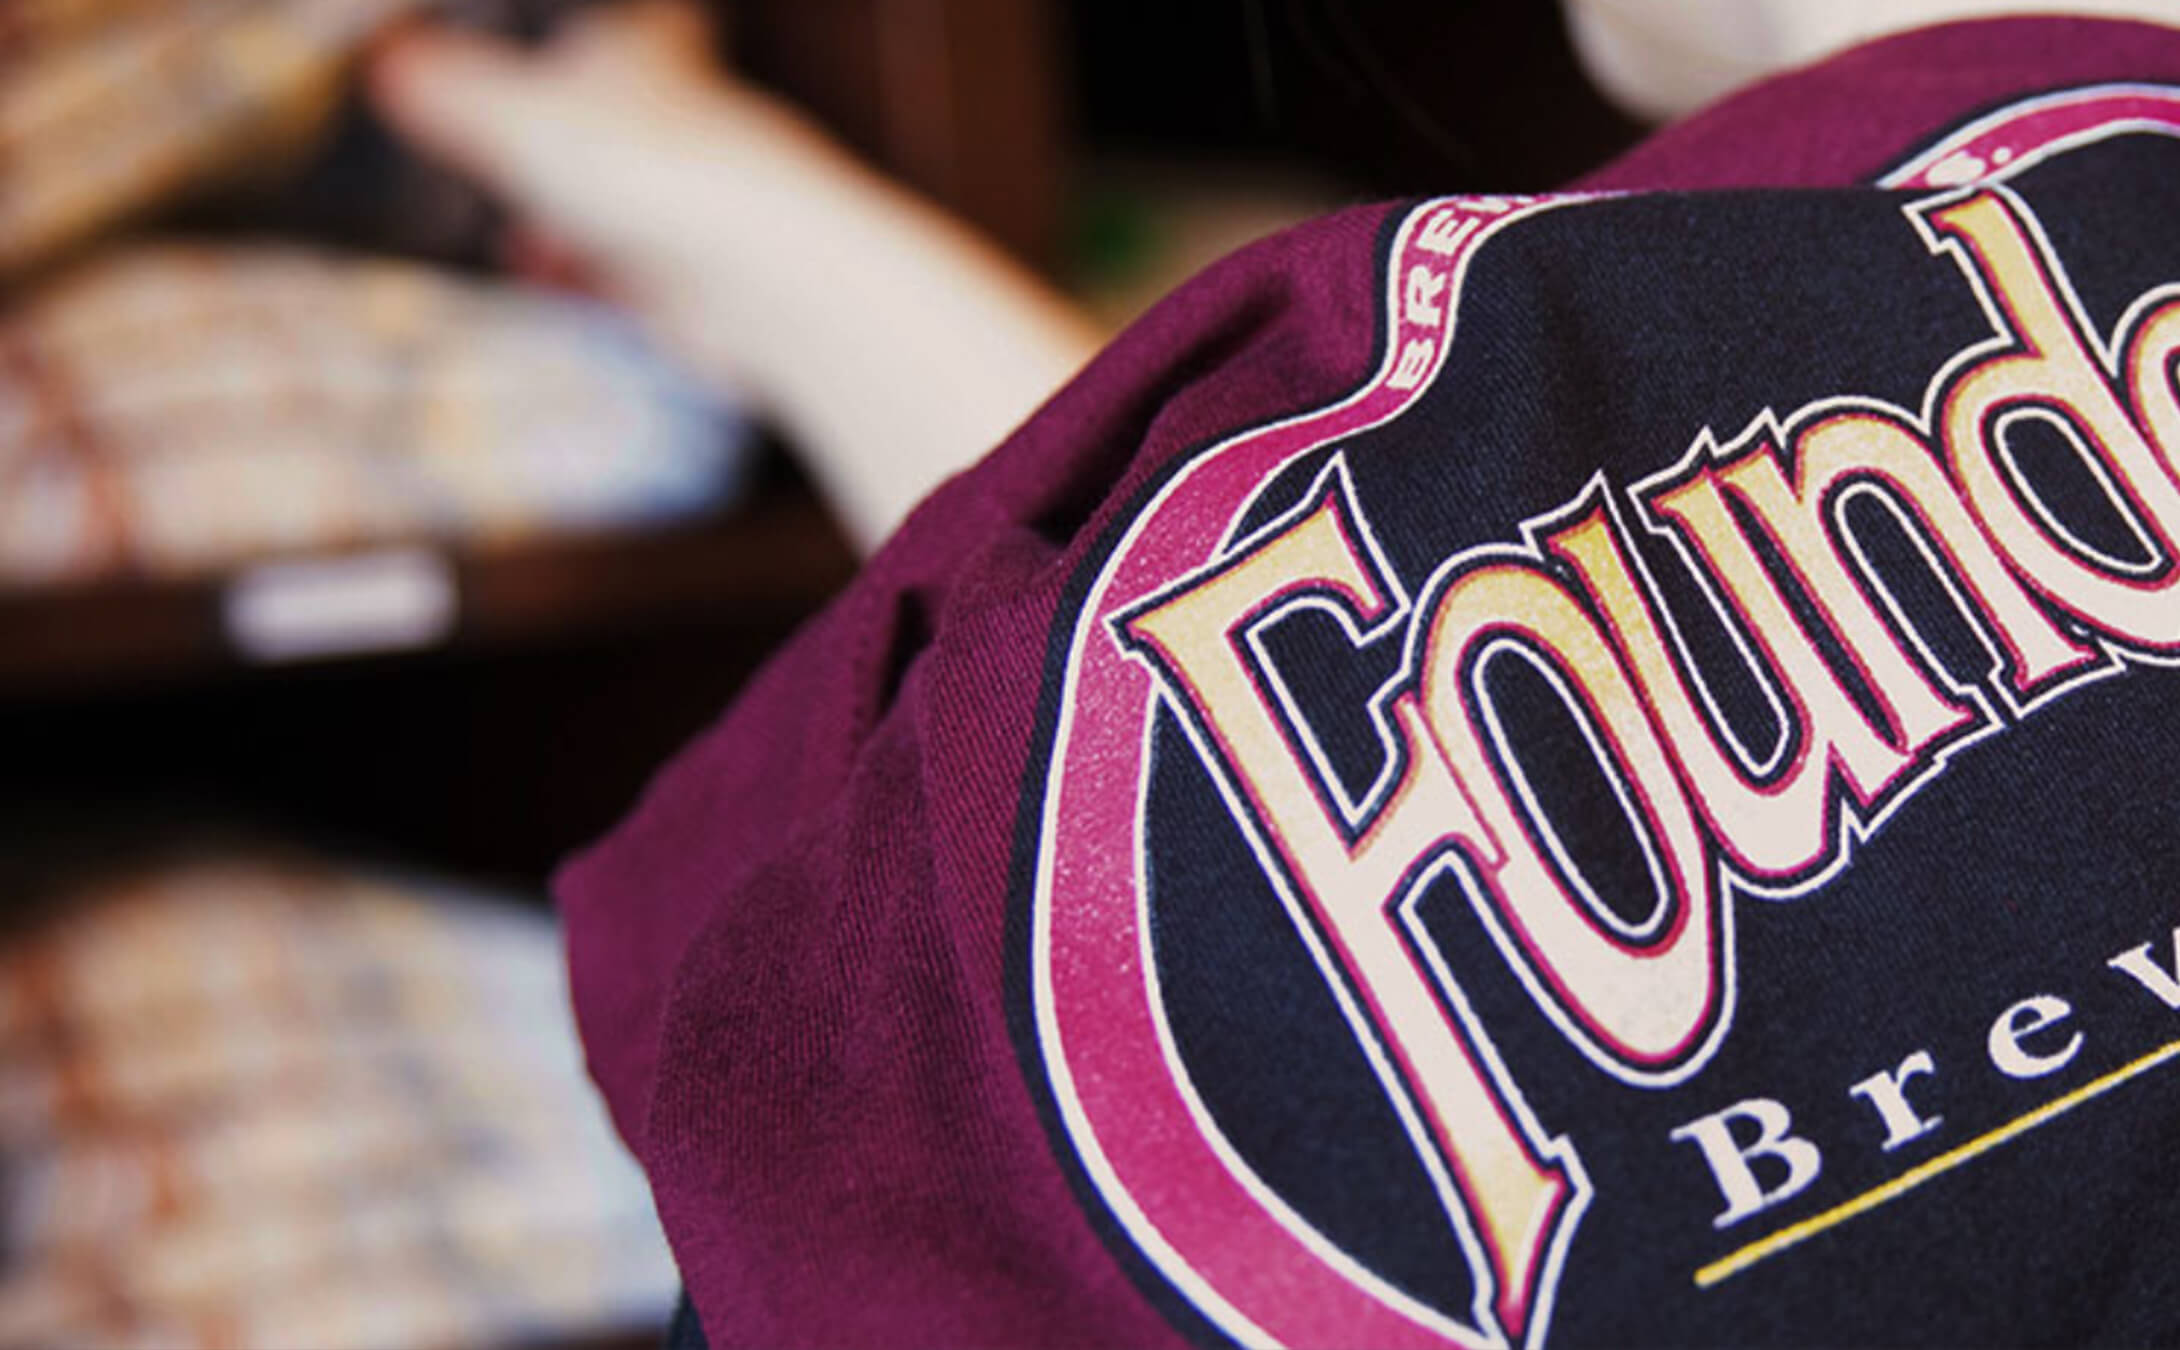 Close up of Founders logo on a clothing item